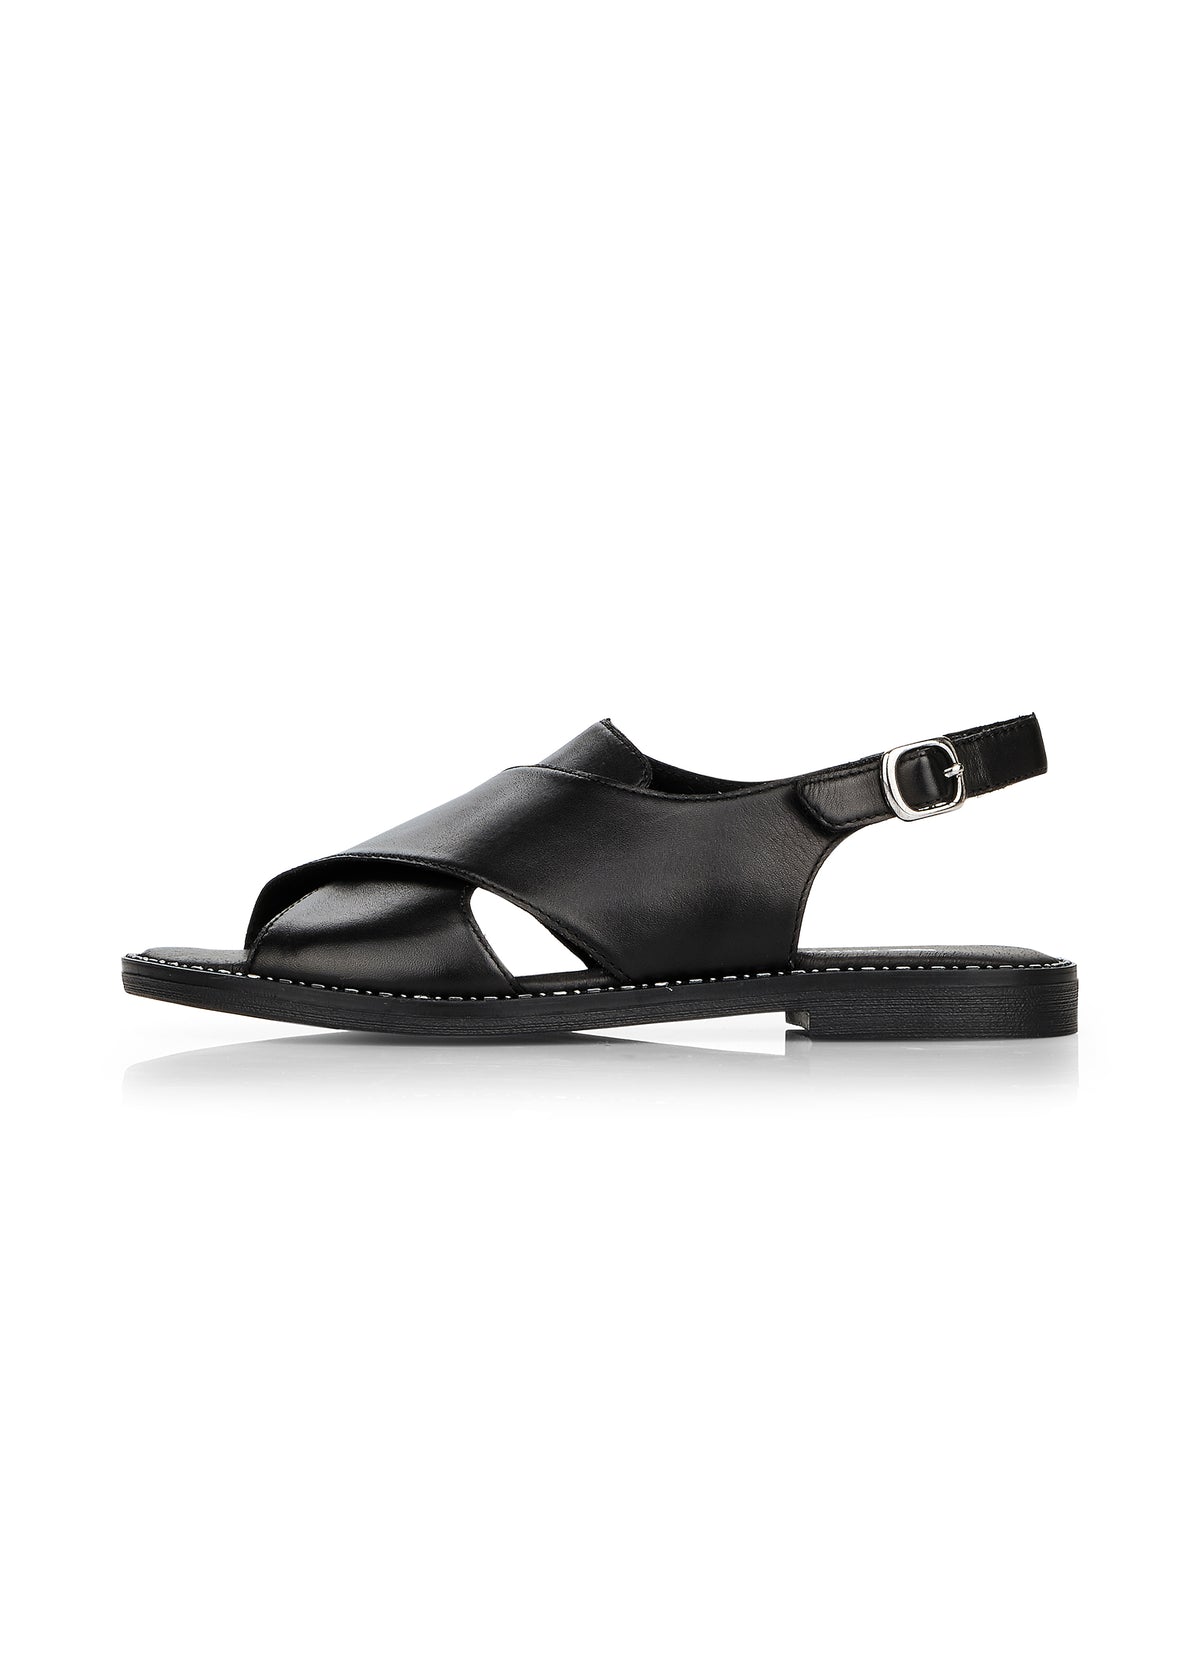 Low sandals with wide straps - black